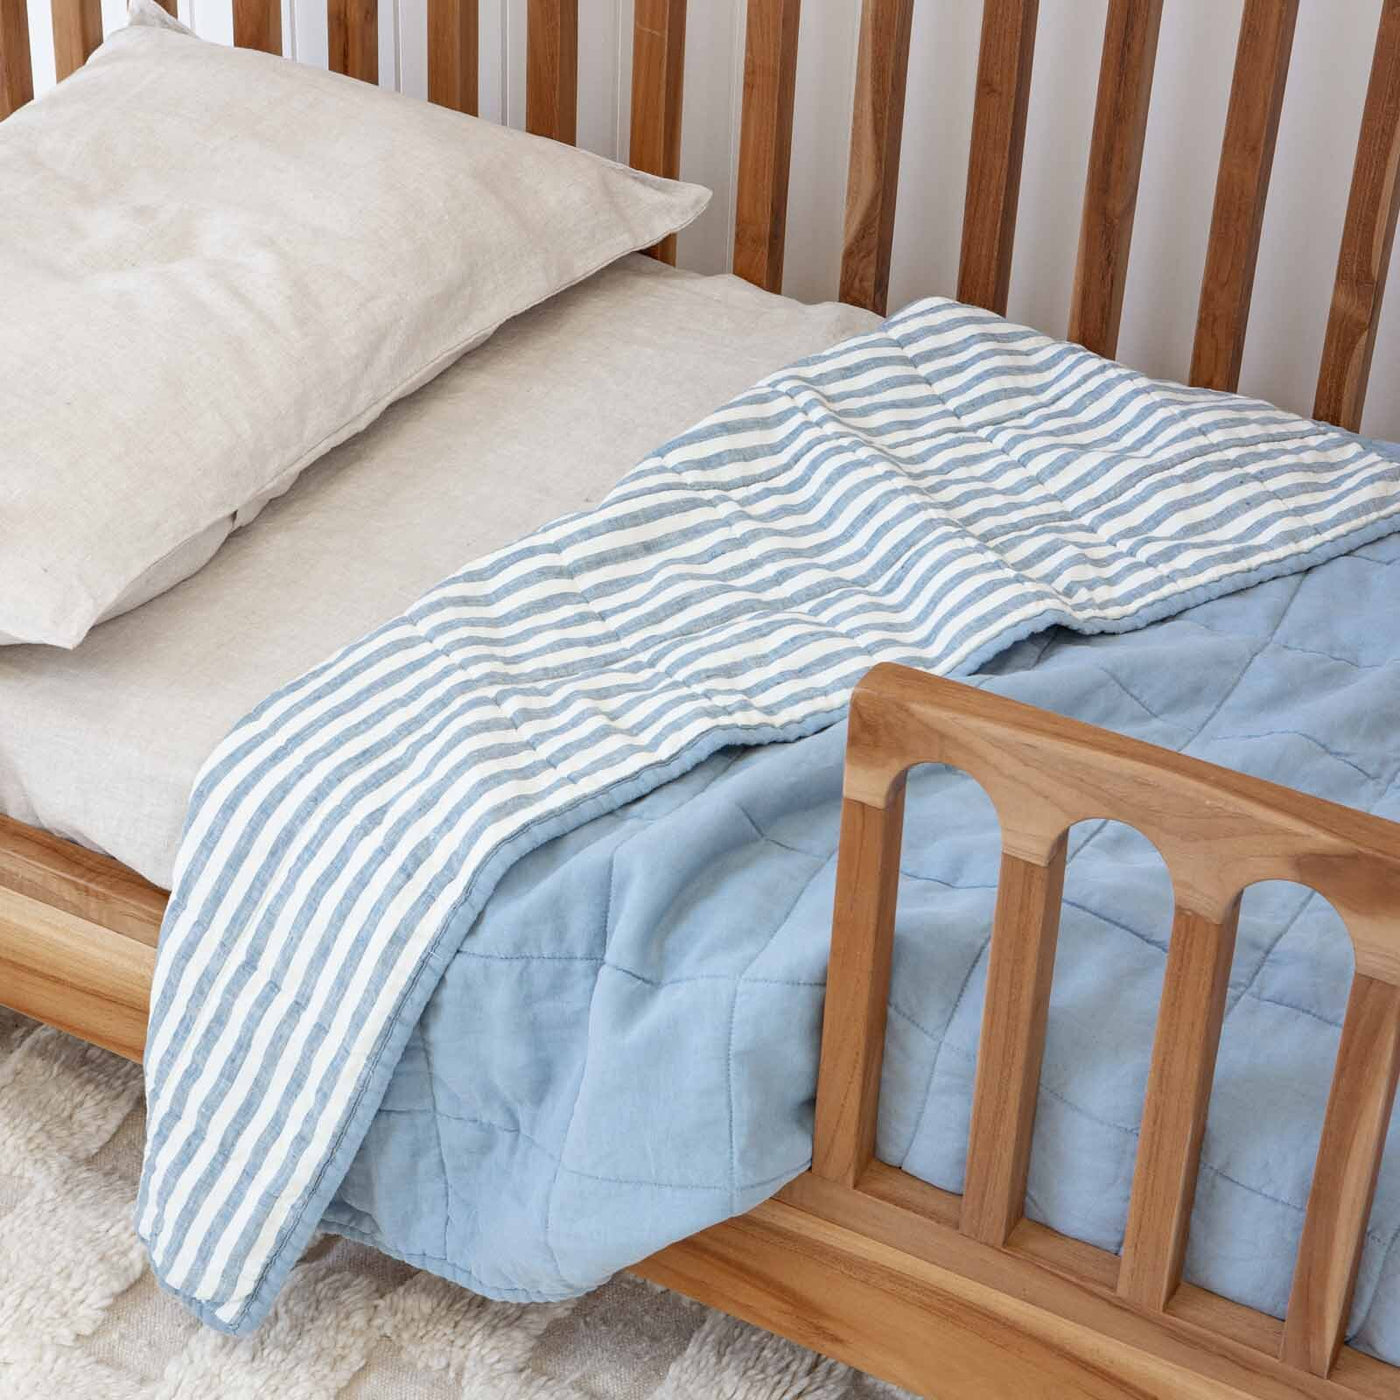 French Flax Linen Cot Quilt/Play Mat in Marine Blue/Marine Blue Stripe